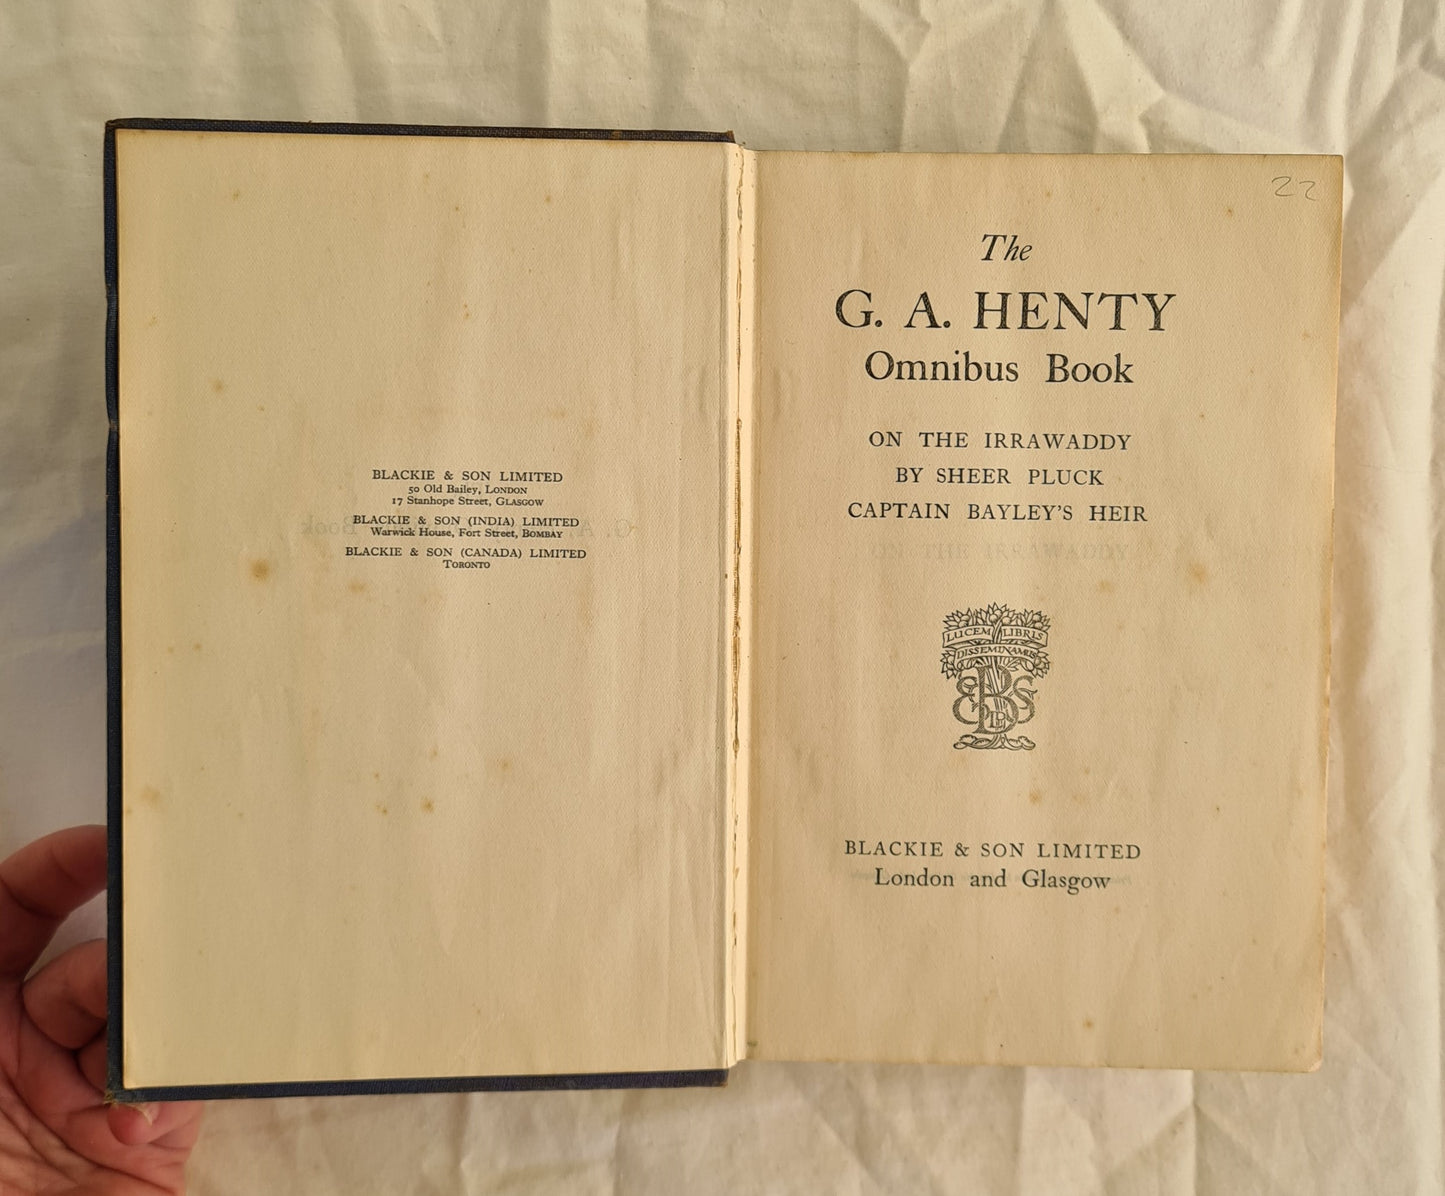 The G. A. Henty Omnibus Book  On the Irrawaddy By Sheer Pluck Captain Bayley’s Heir  by G. A. Henty